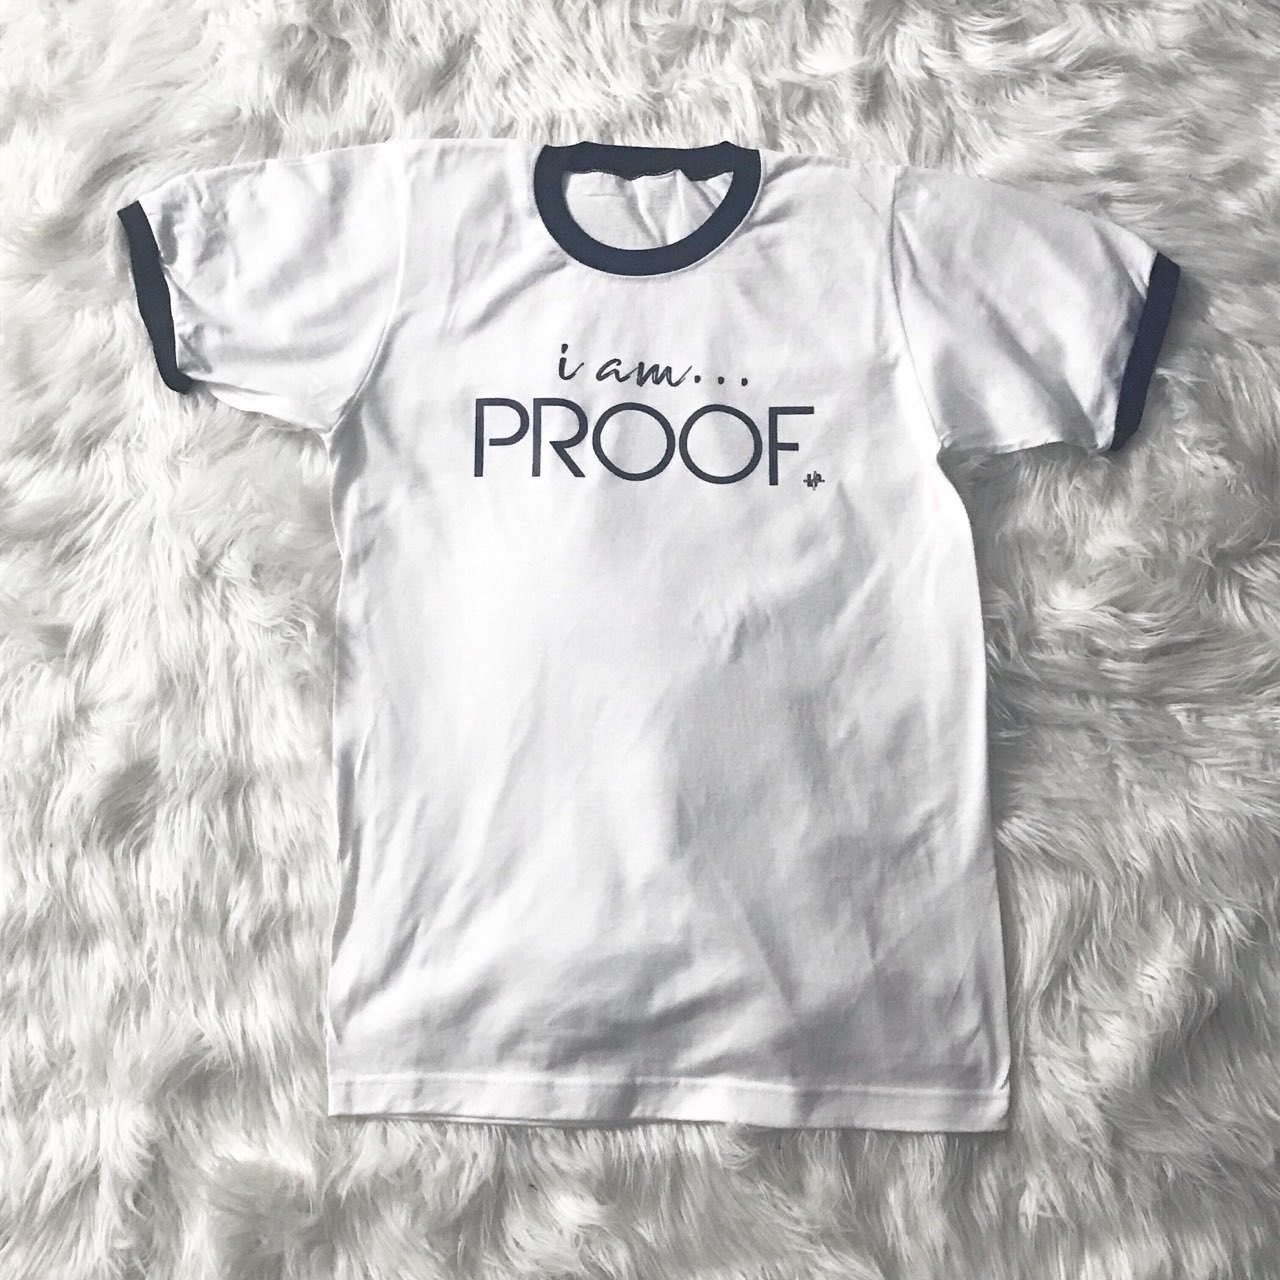 "i am PROOF" Ringer Tee White with Black Trim